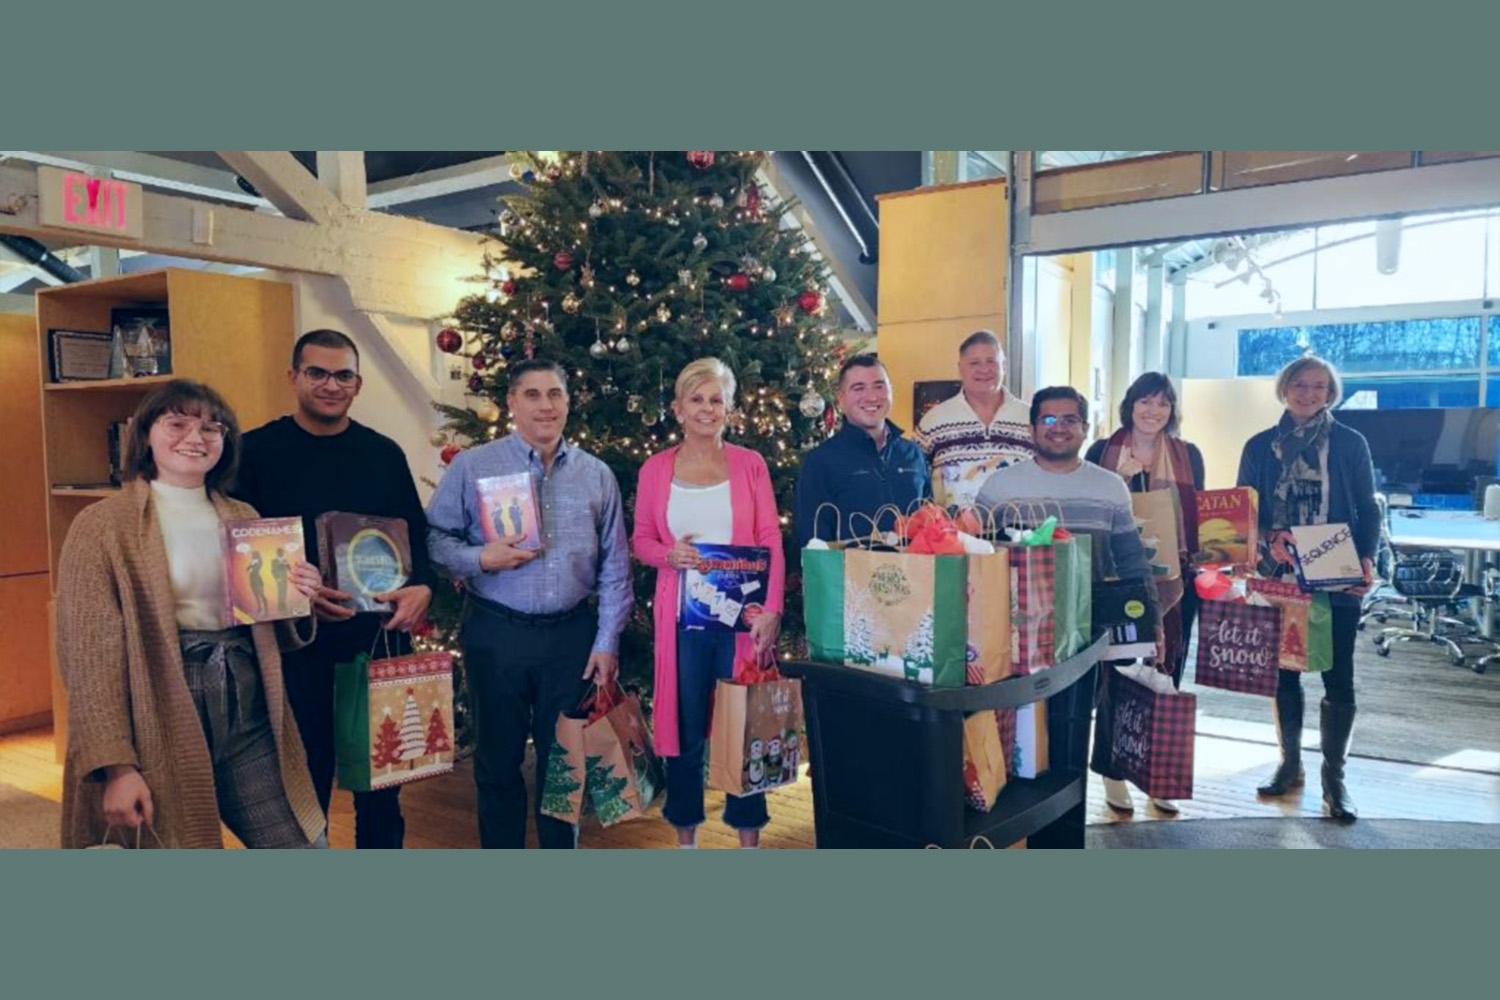 Group stands in front of Christmas tree, donating gifts to non-profit